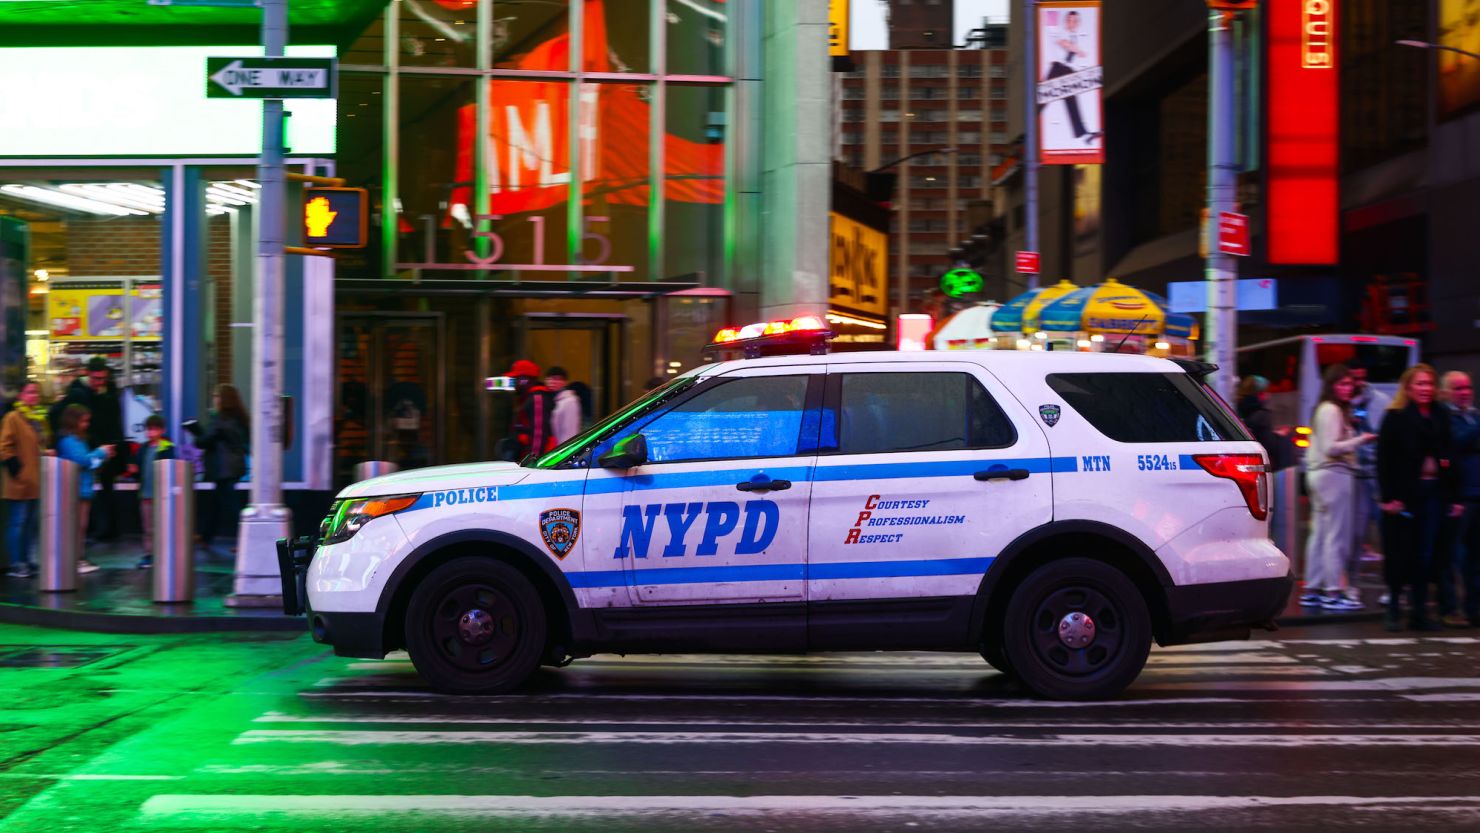 The New York Police Department has settled a class action lawsuit, the city announced Friday.